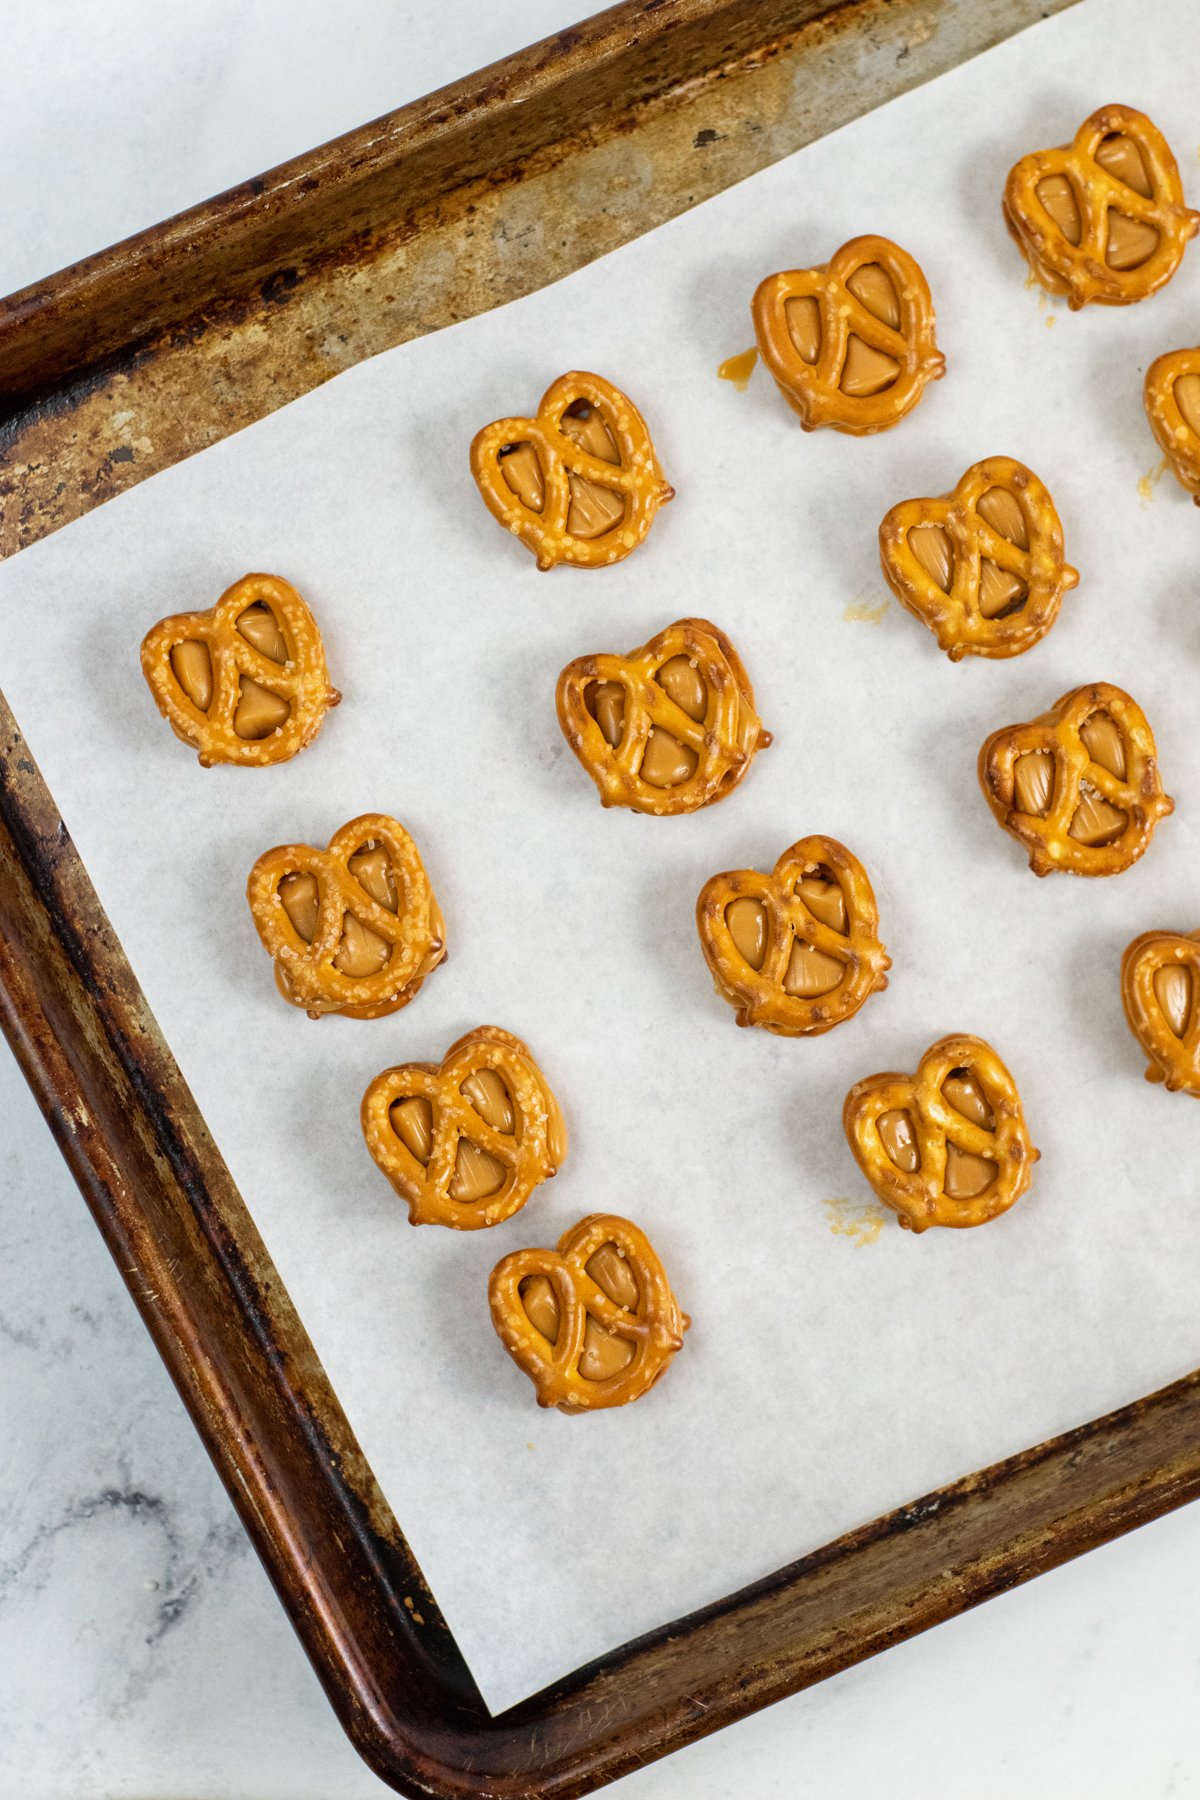 pretzels with caramels in the middle